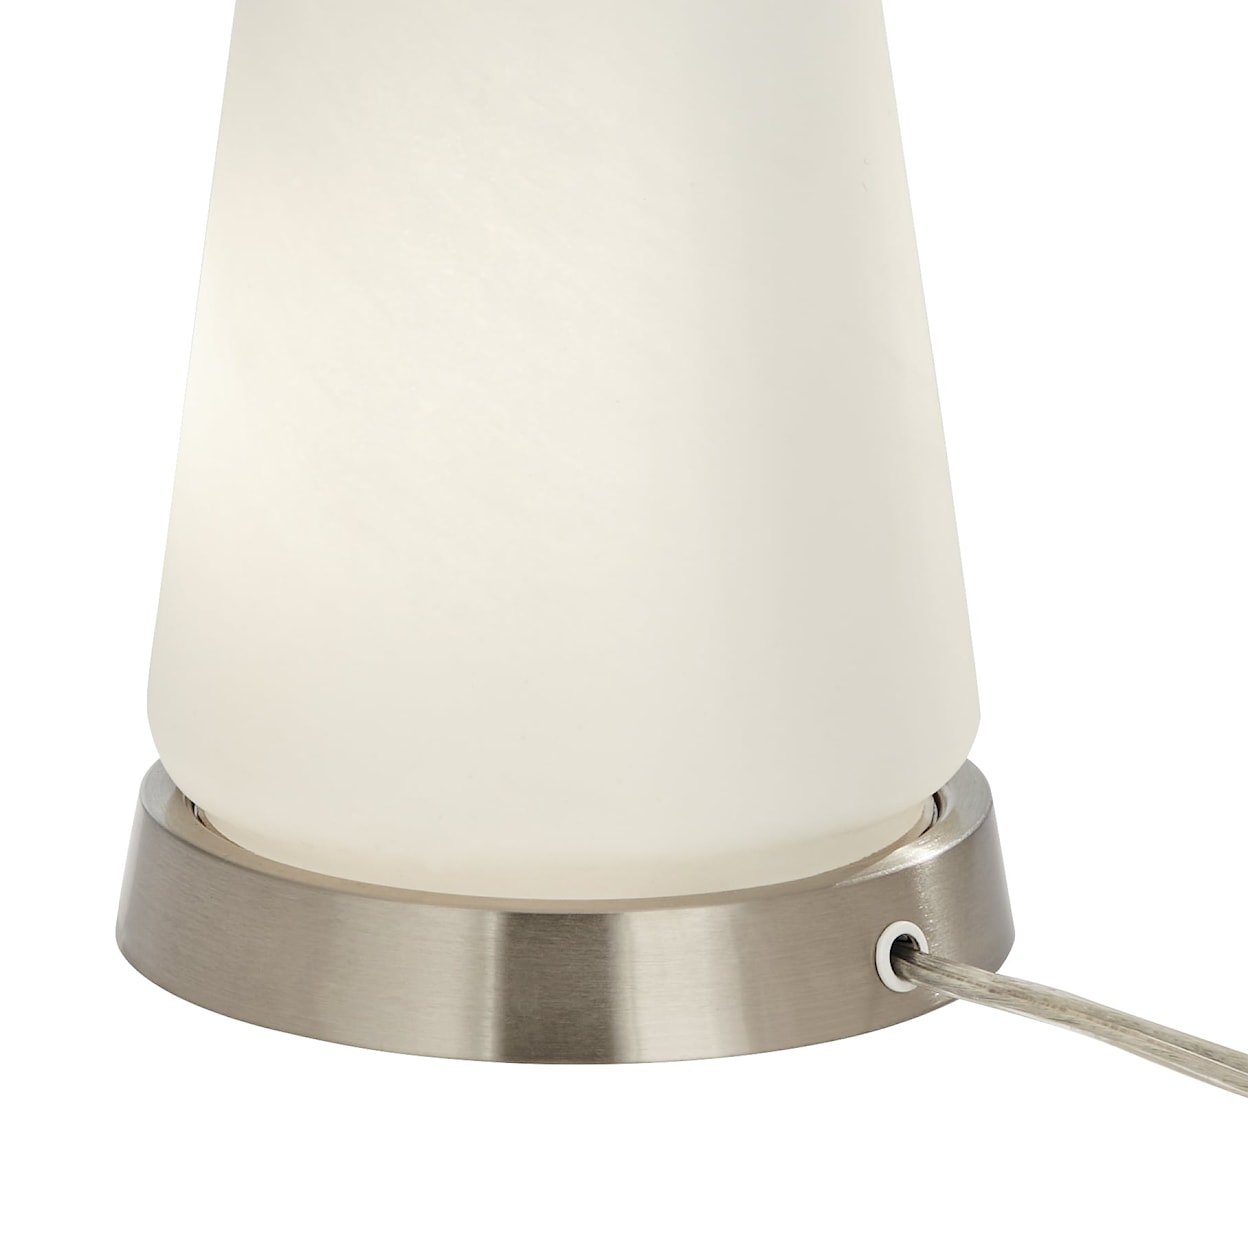 Pacific Coast Lighting Pacific Coast Lighting Tl-Faux Alabaster Glass With B Nickel